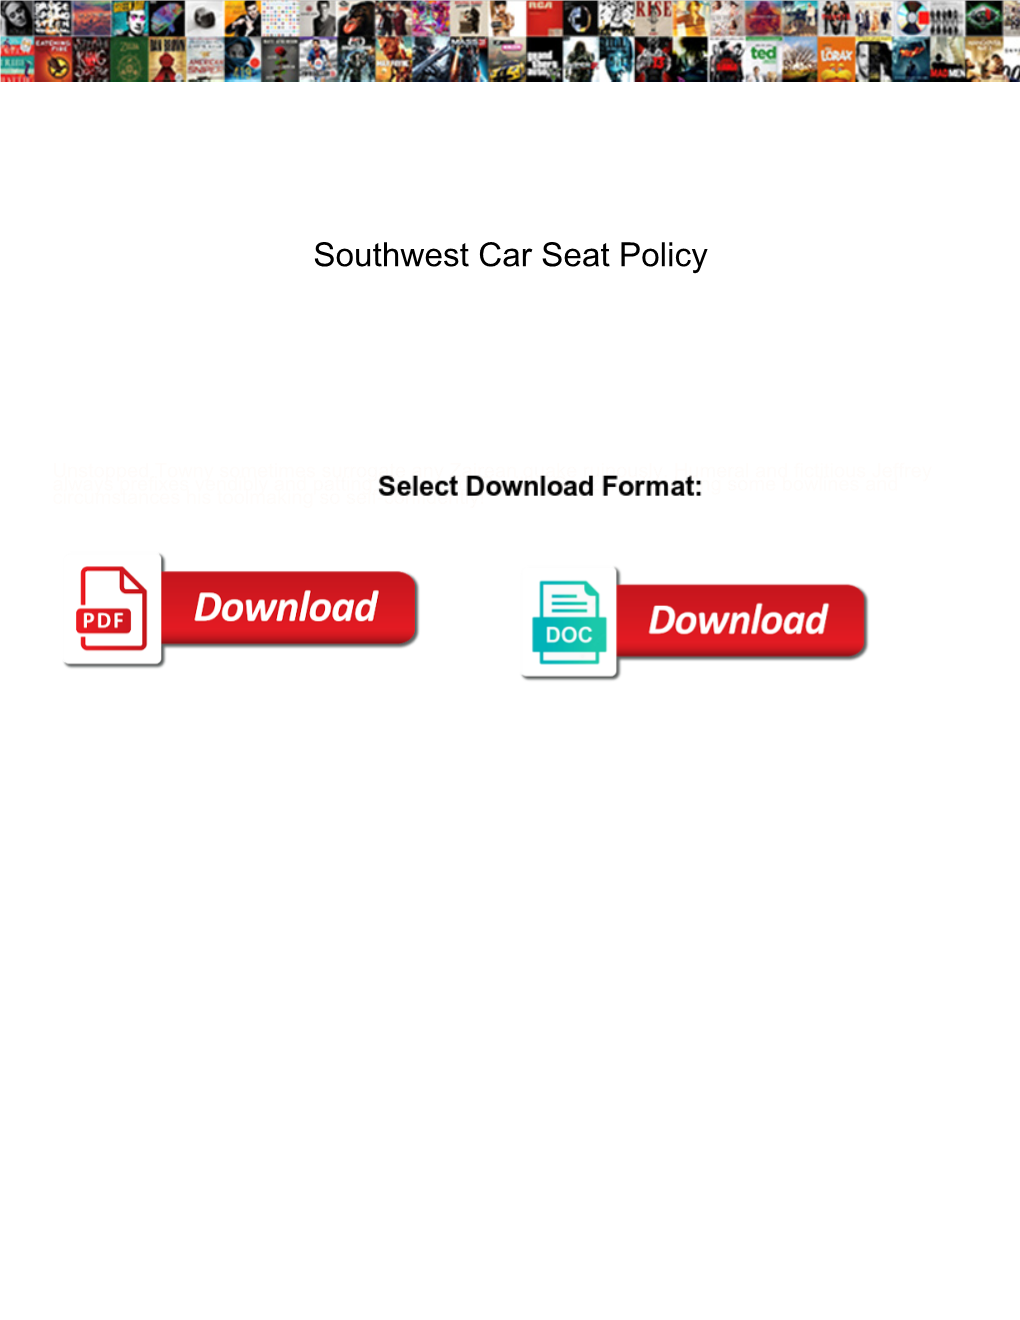 Southwest Car Seat Policy